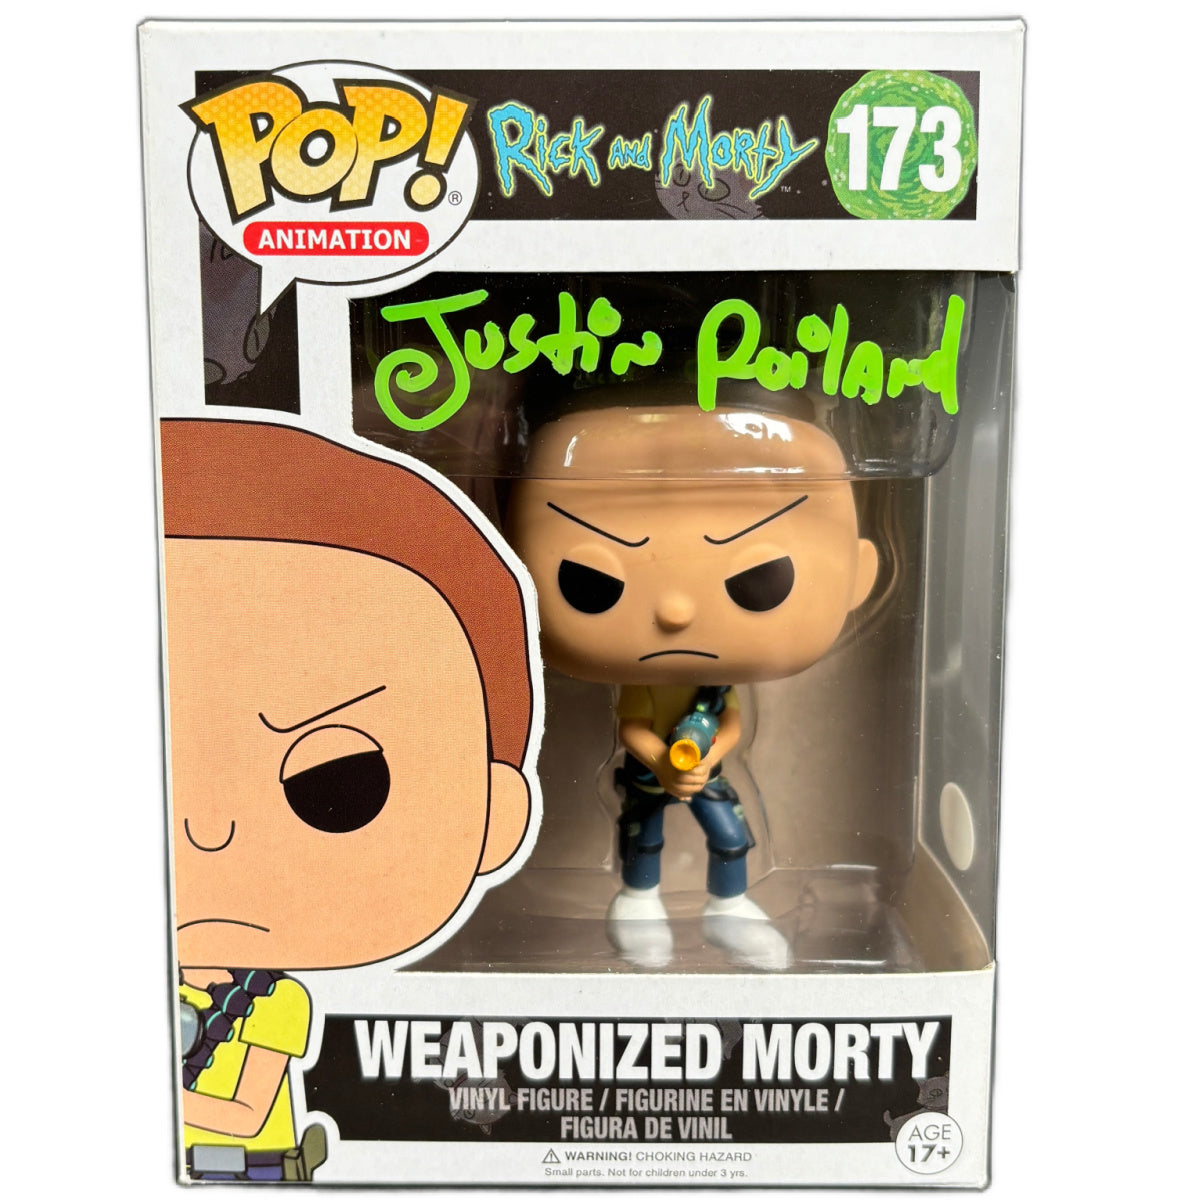 Justin Roiland Signed Funko POP Rick and Morty Weaponized Morty 173 Autographed JSA